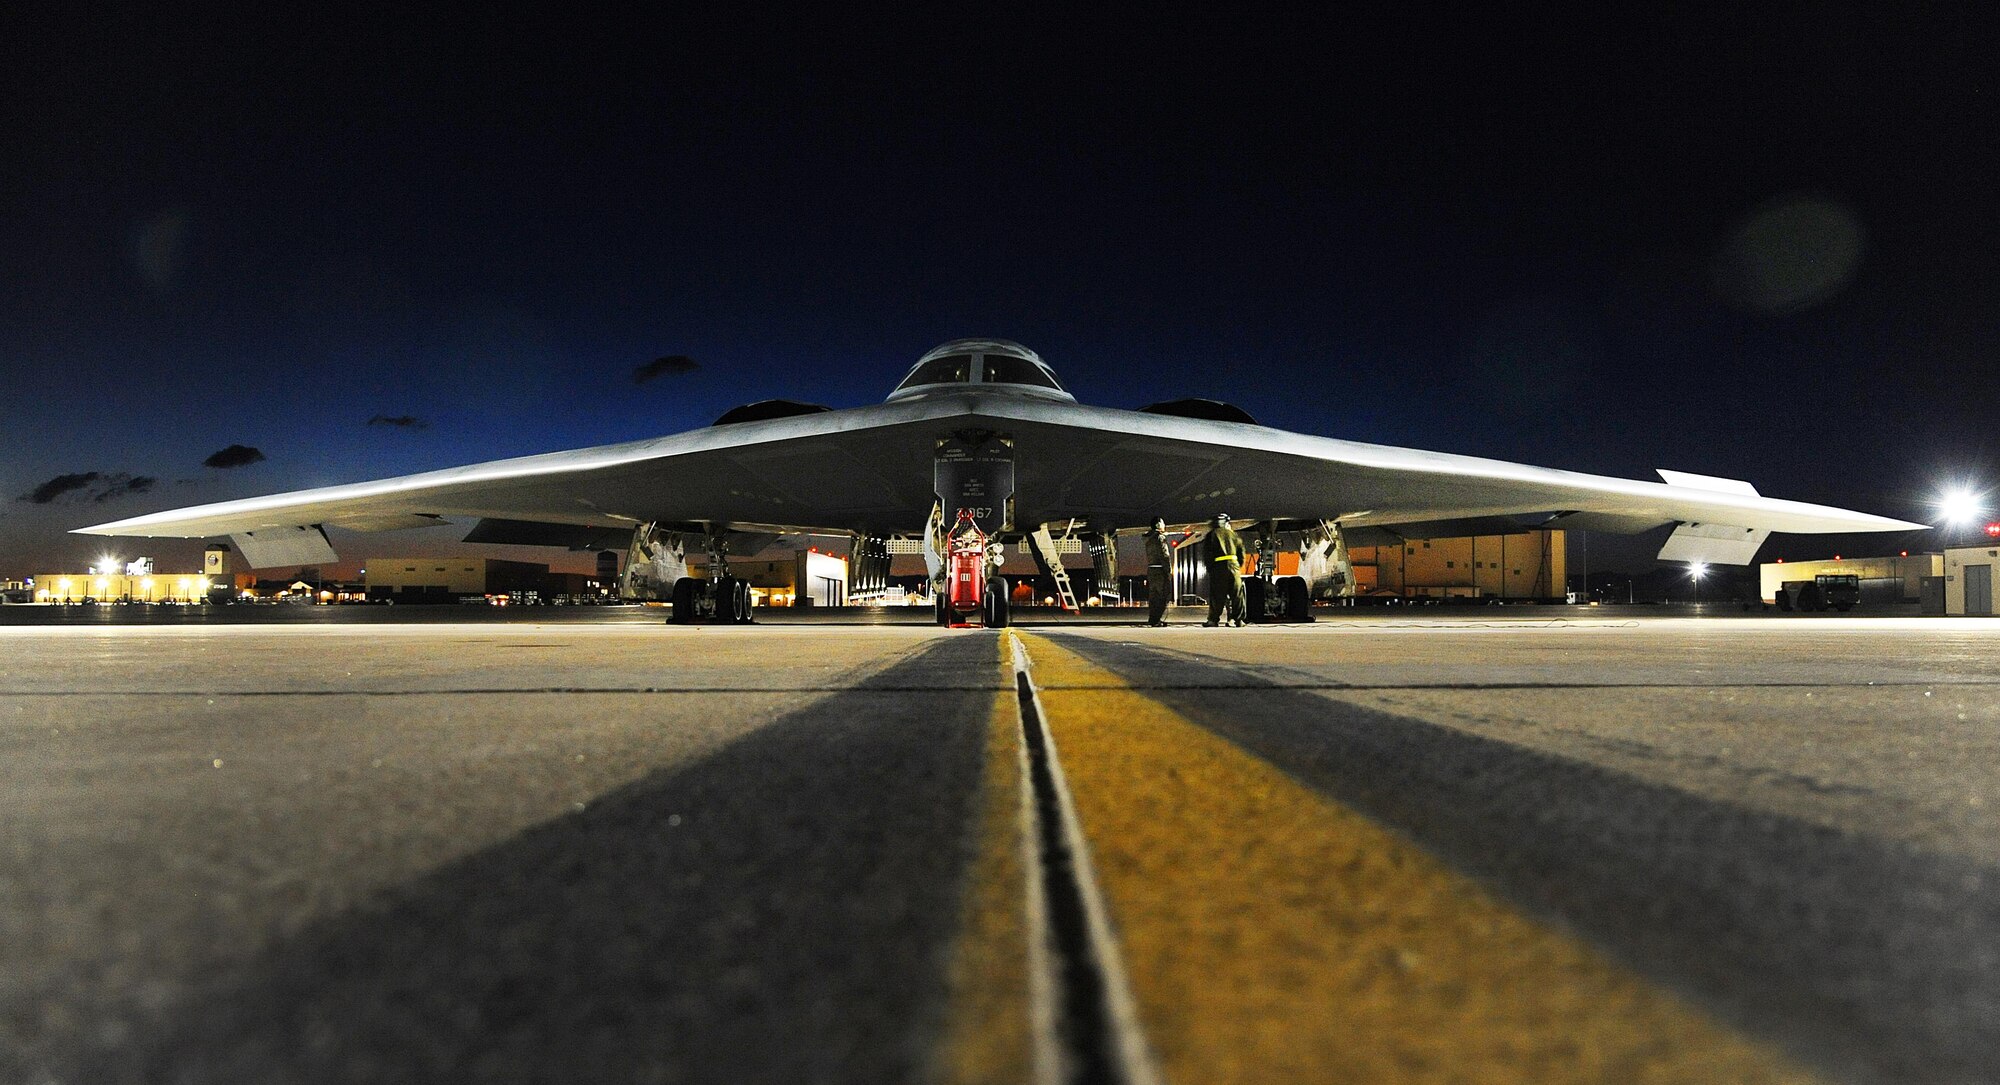 A U.S. Air Force B-2 Spirit aircraft sits on the flightline prior to takeoff at Whiteman Air Force Base, Mo., for Red Flag (RF) 16-1 Feb. 2, 2016. Established in 1975, RF includes command, control, intelligence and electronic warfare exercises to better prepare forces for combat. (U.S. Air Force photo by Airman 1st Class Michaela R. Slanchik)